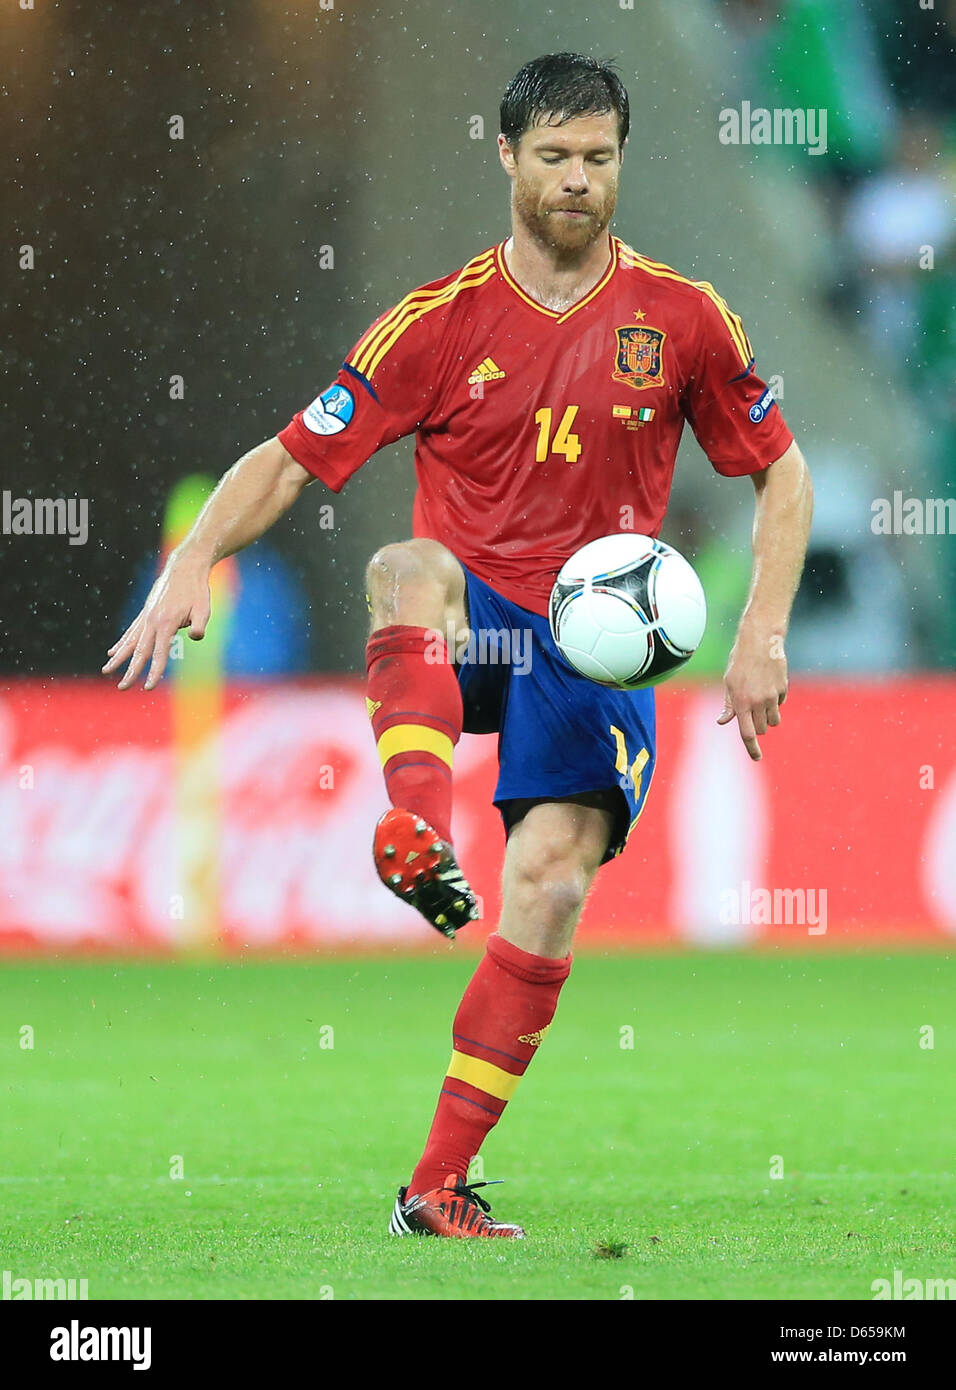 Spain's Xabi Alonso in action during UEFA EURO 2012 group C soccer match Spain vs Italy at Arena Gdansk in Gdansk, Poland, 14 June 2012. Photo: Jens Wolf dpa (Please refer to chapters 7 and 8 of http://dpaq.de/Ziovh for UEFA Euro 2012 Terms & Conditions)  +++(c) dpa - Bildfunk+++ Stock Photo